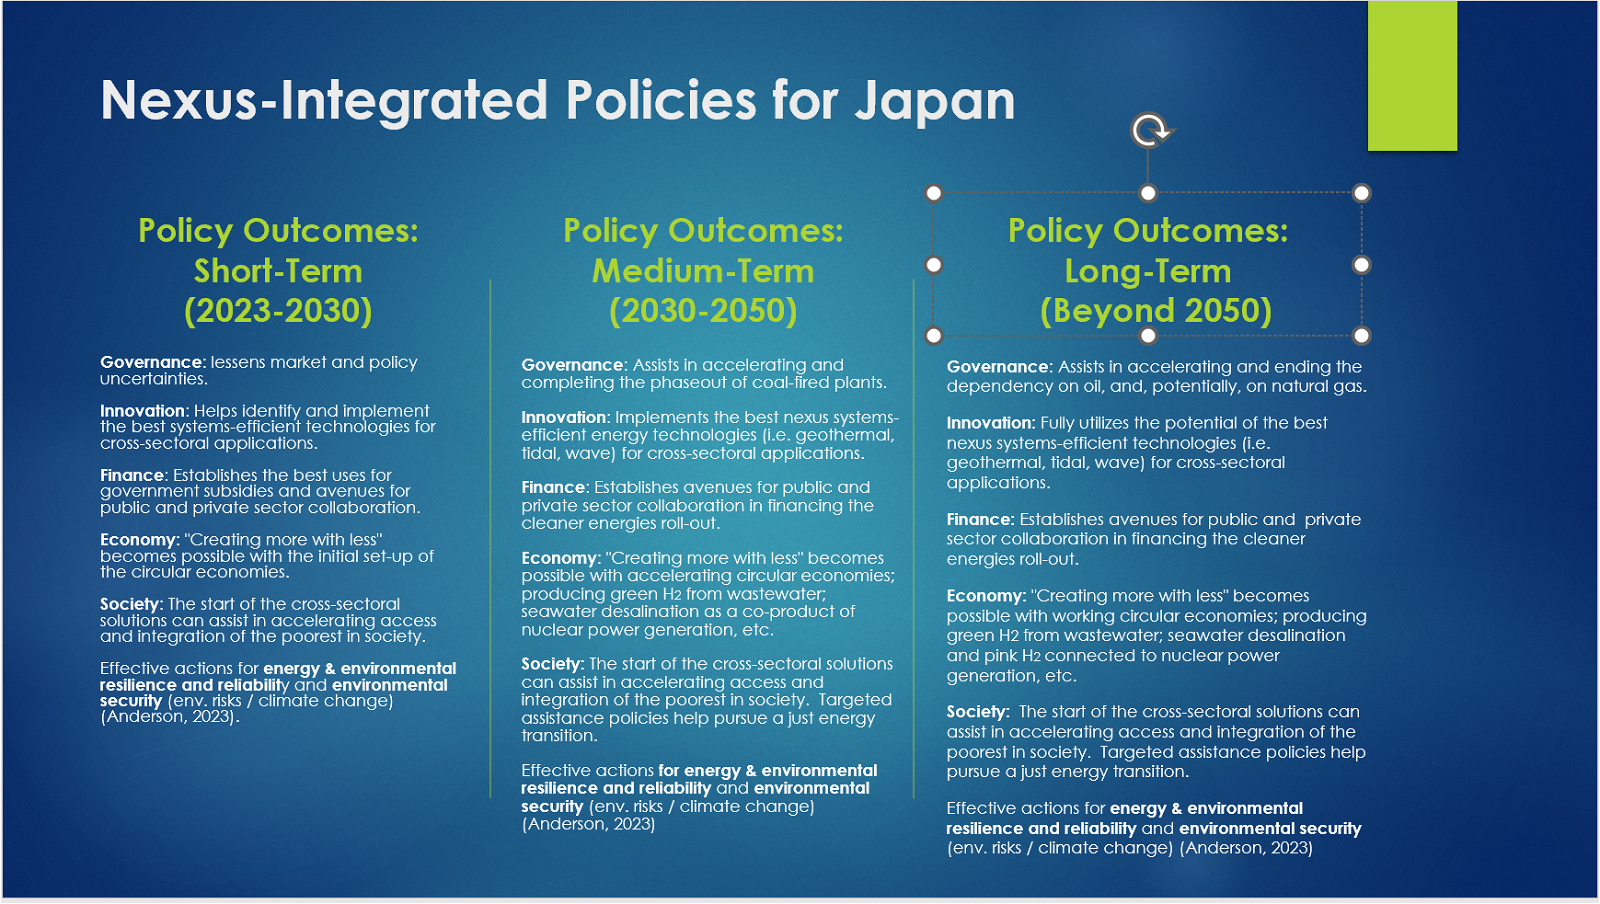 Nexus-Integrated Policy Outcomes for Japan